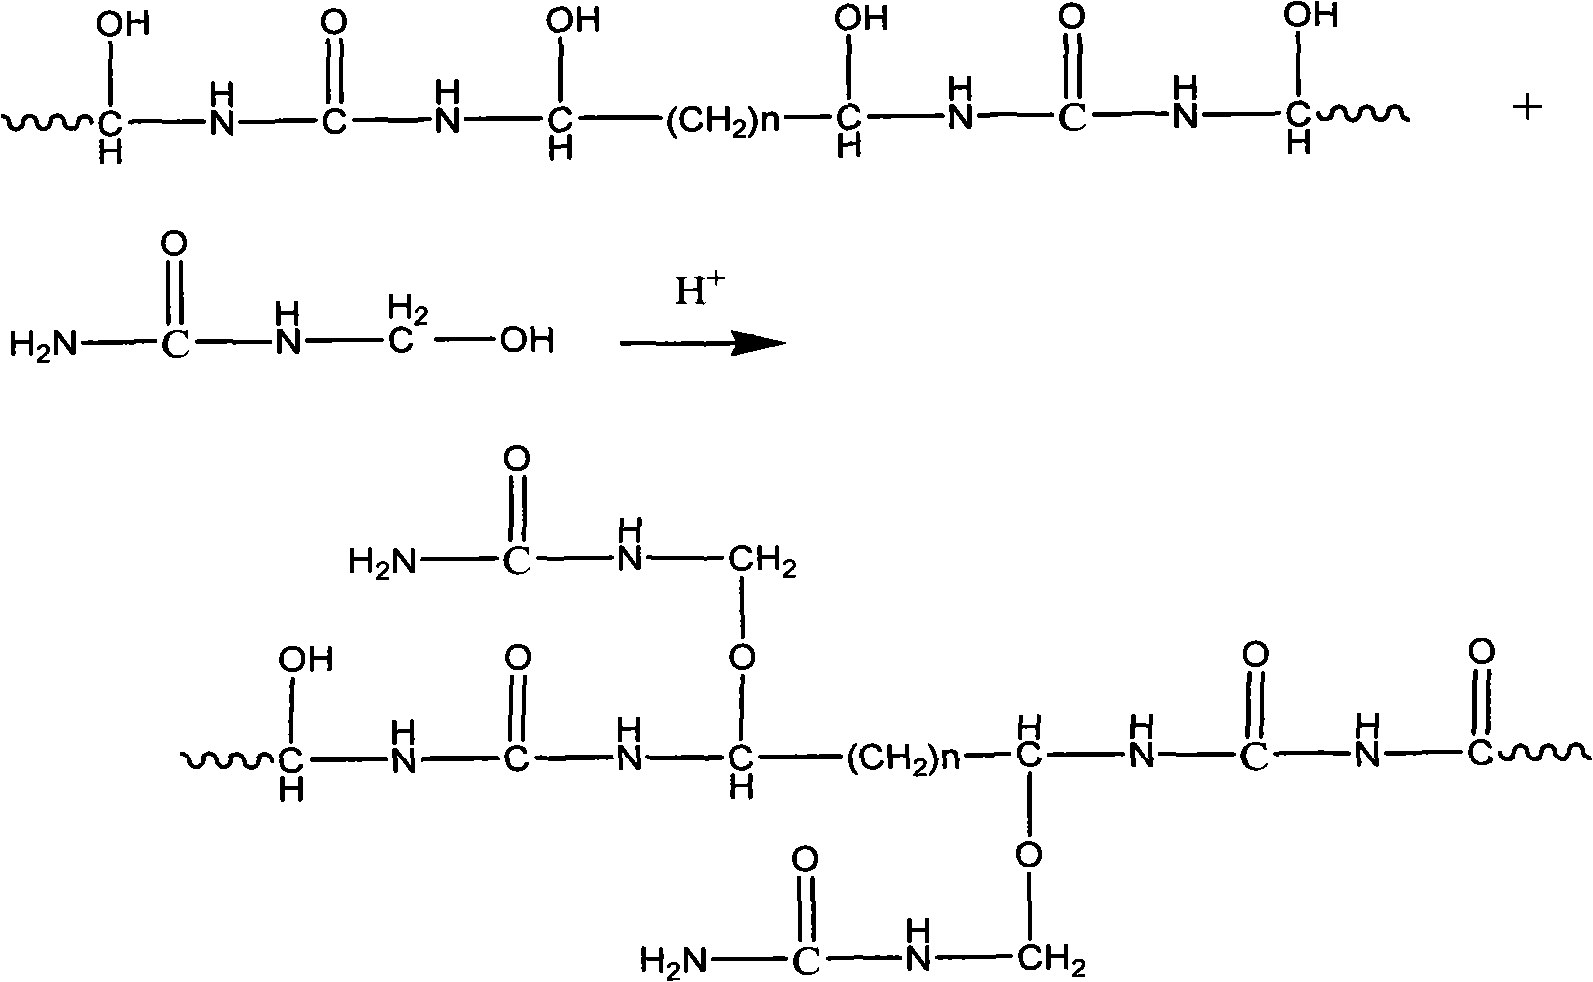 Environmental protection urea-formaldehyde resin and preparation method thereof